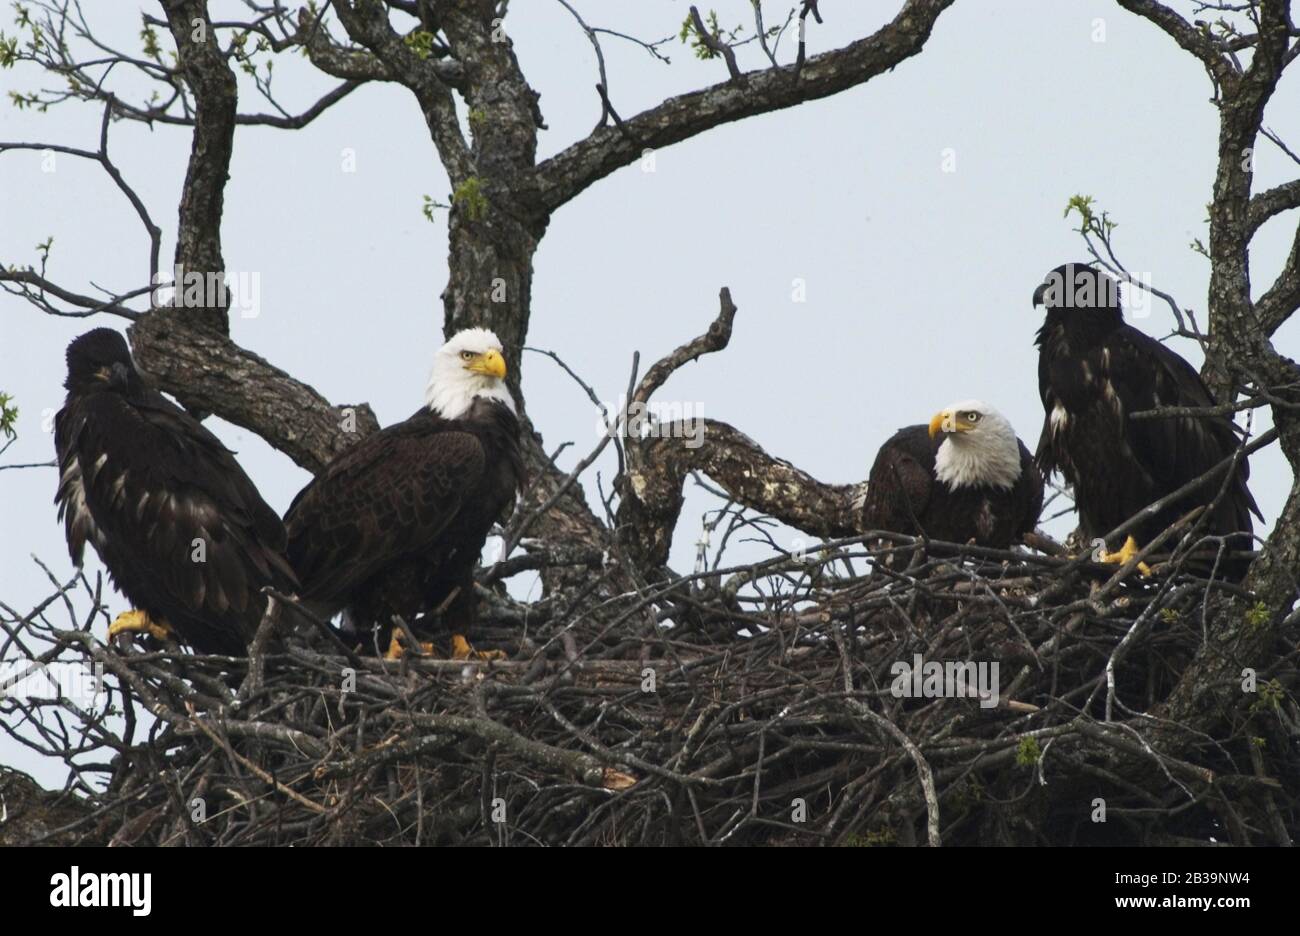 Llano County Texas USA, April 4, 2004: An American bald eagle pair and their two immature offspring perch on a limb overlooking the Llano River in central Texas about 120 yards from a major highway. ©Bob Daemmrich Stock Photo